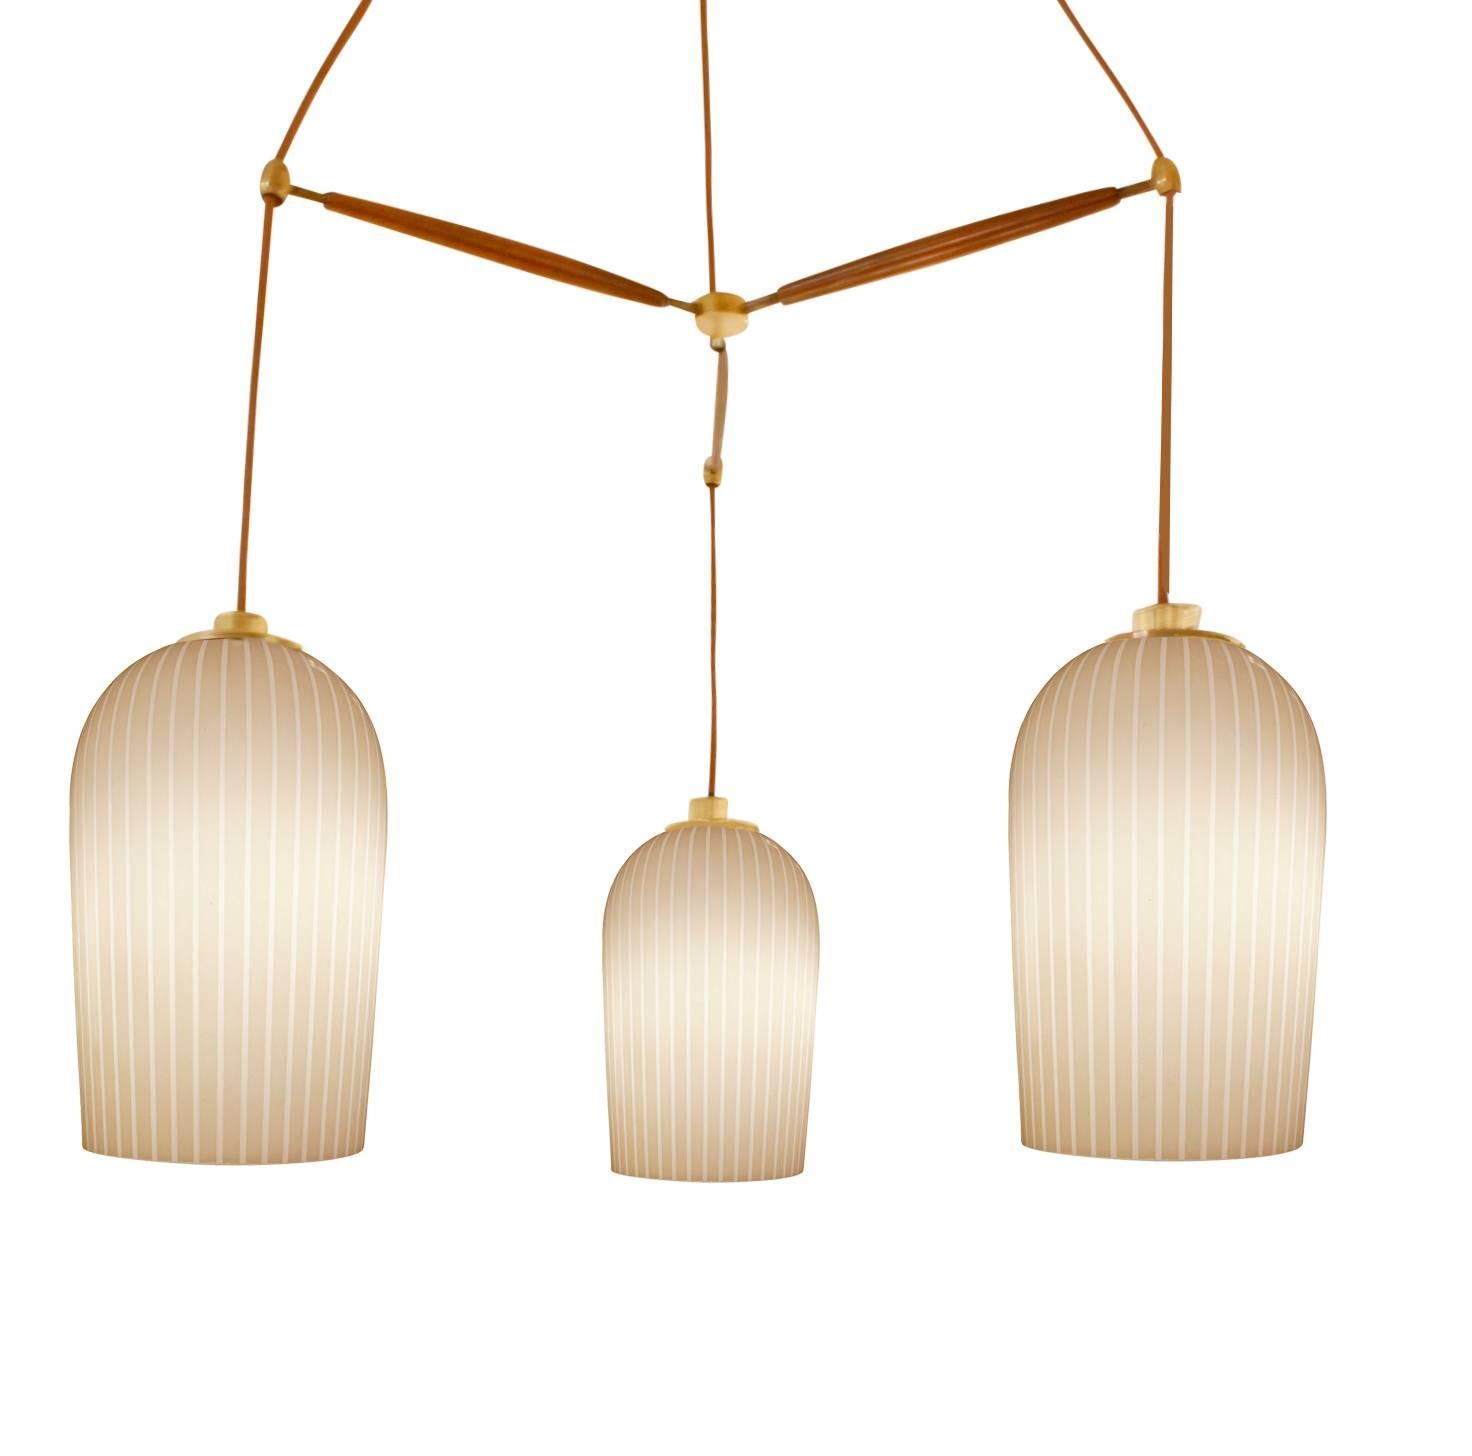 American Lightolier Chandelier with Three Striped Milk Glass Shades, 1950s For Sale